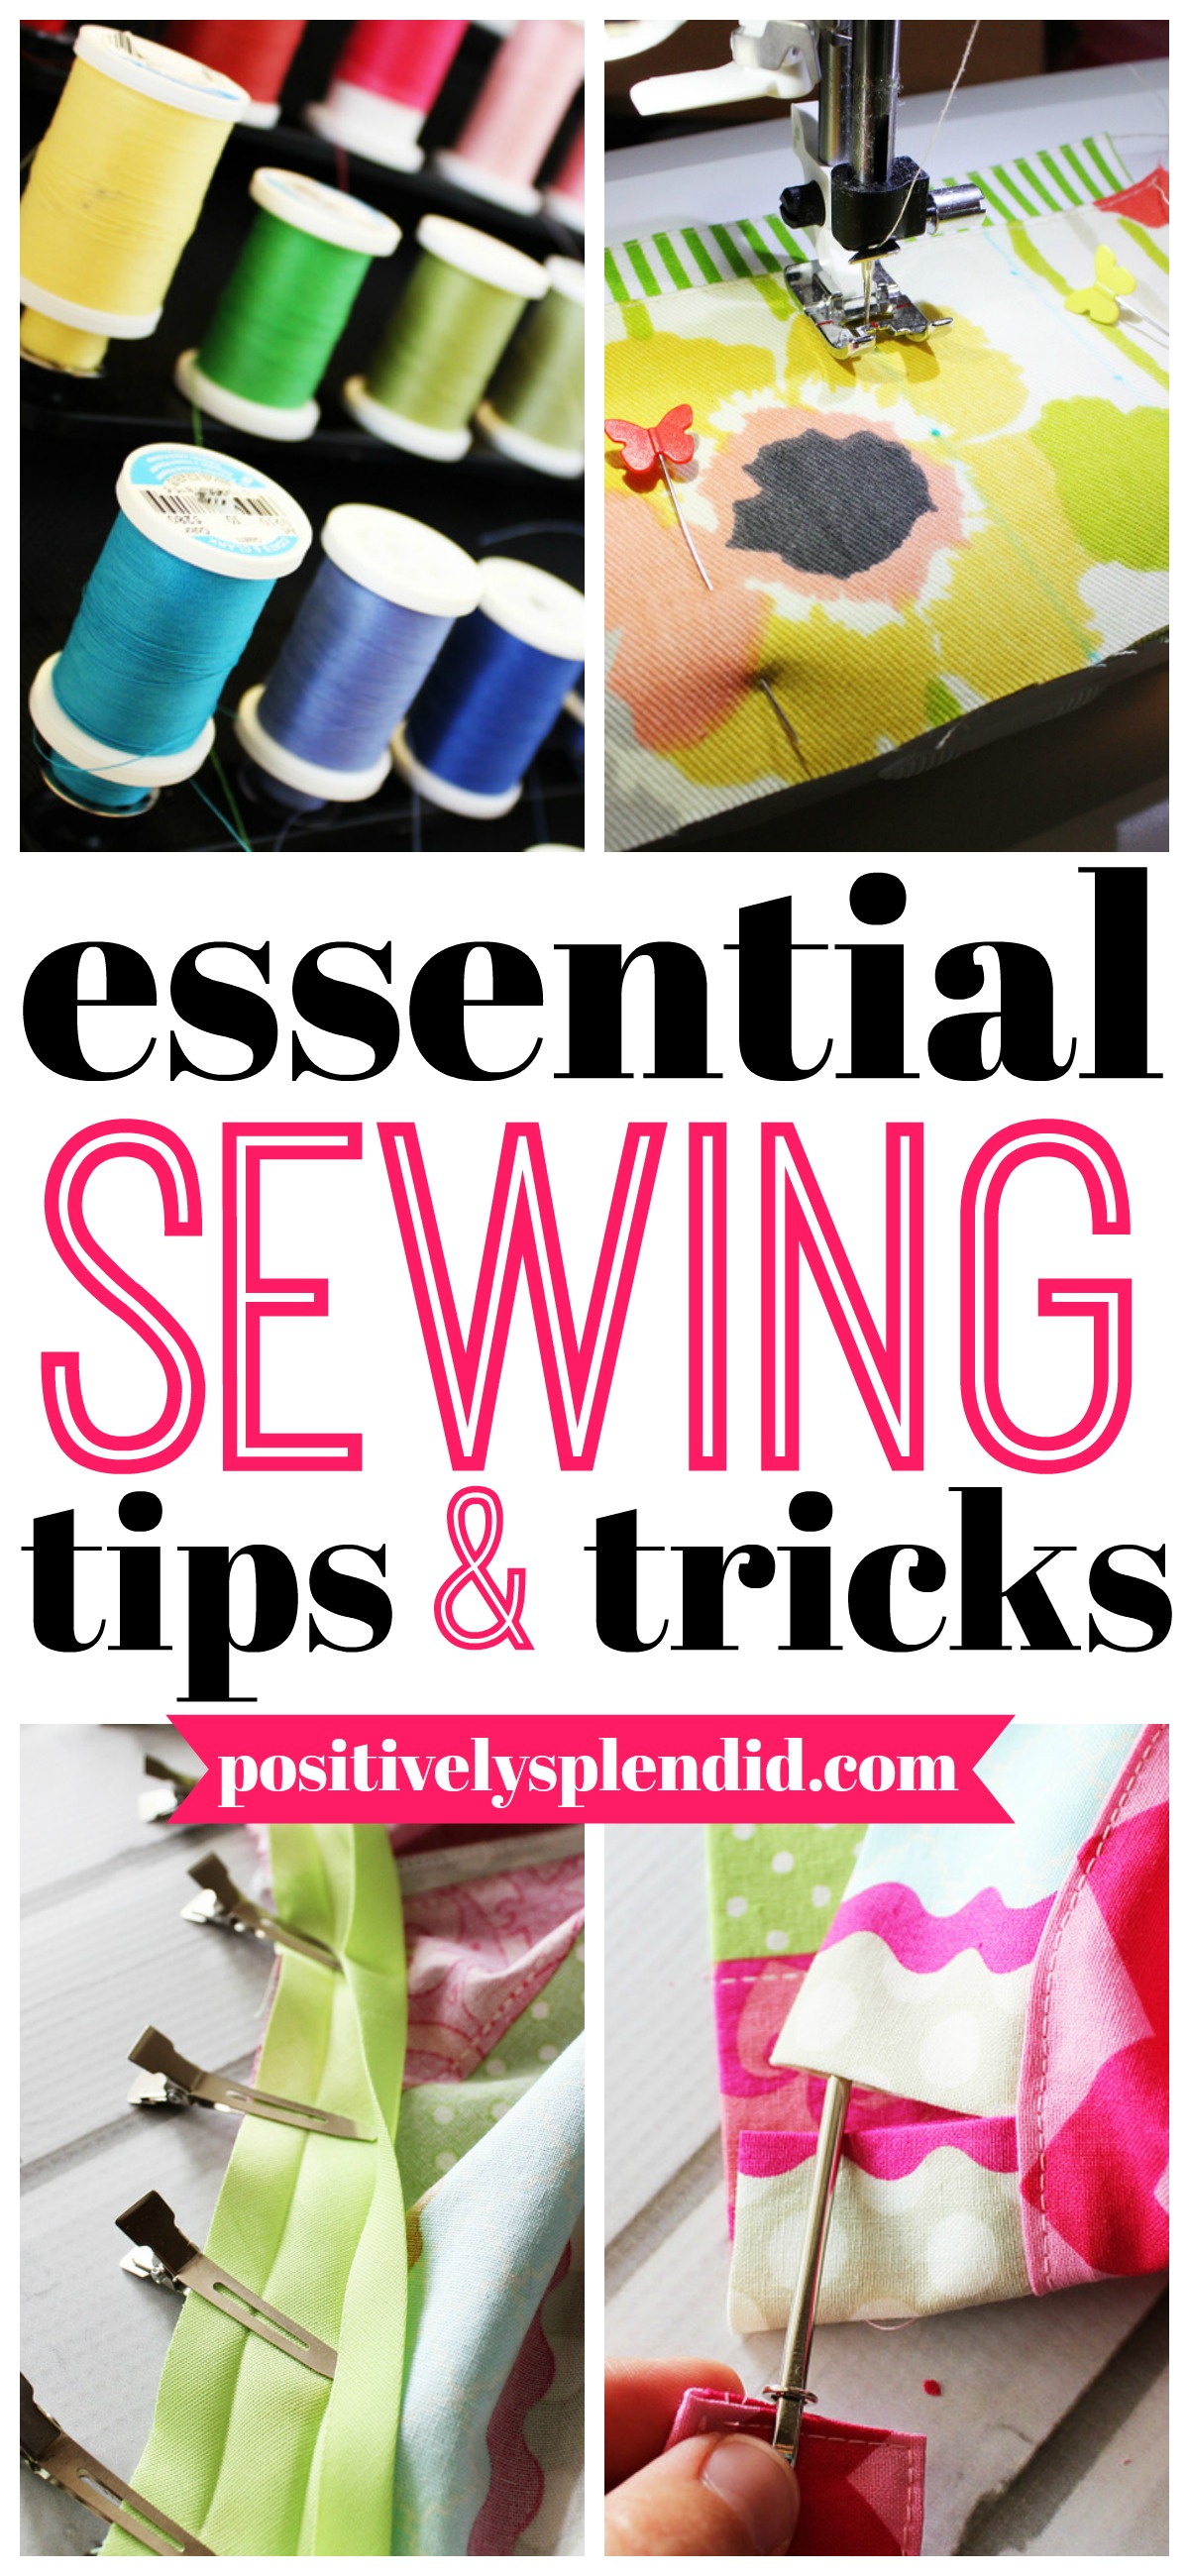 Essential Sewing Tips and Tricks